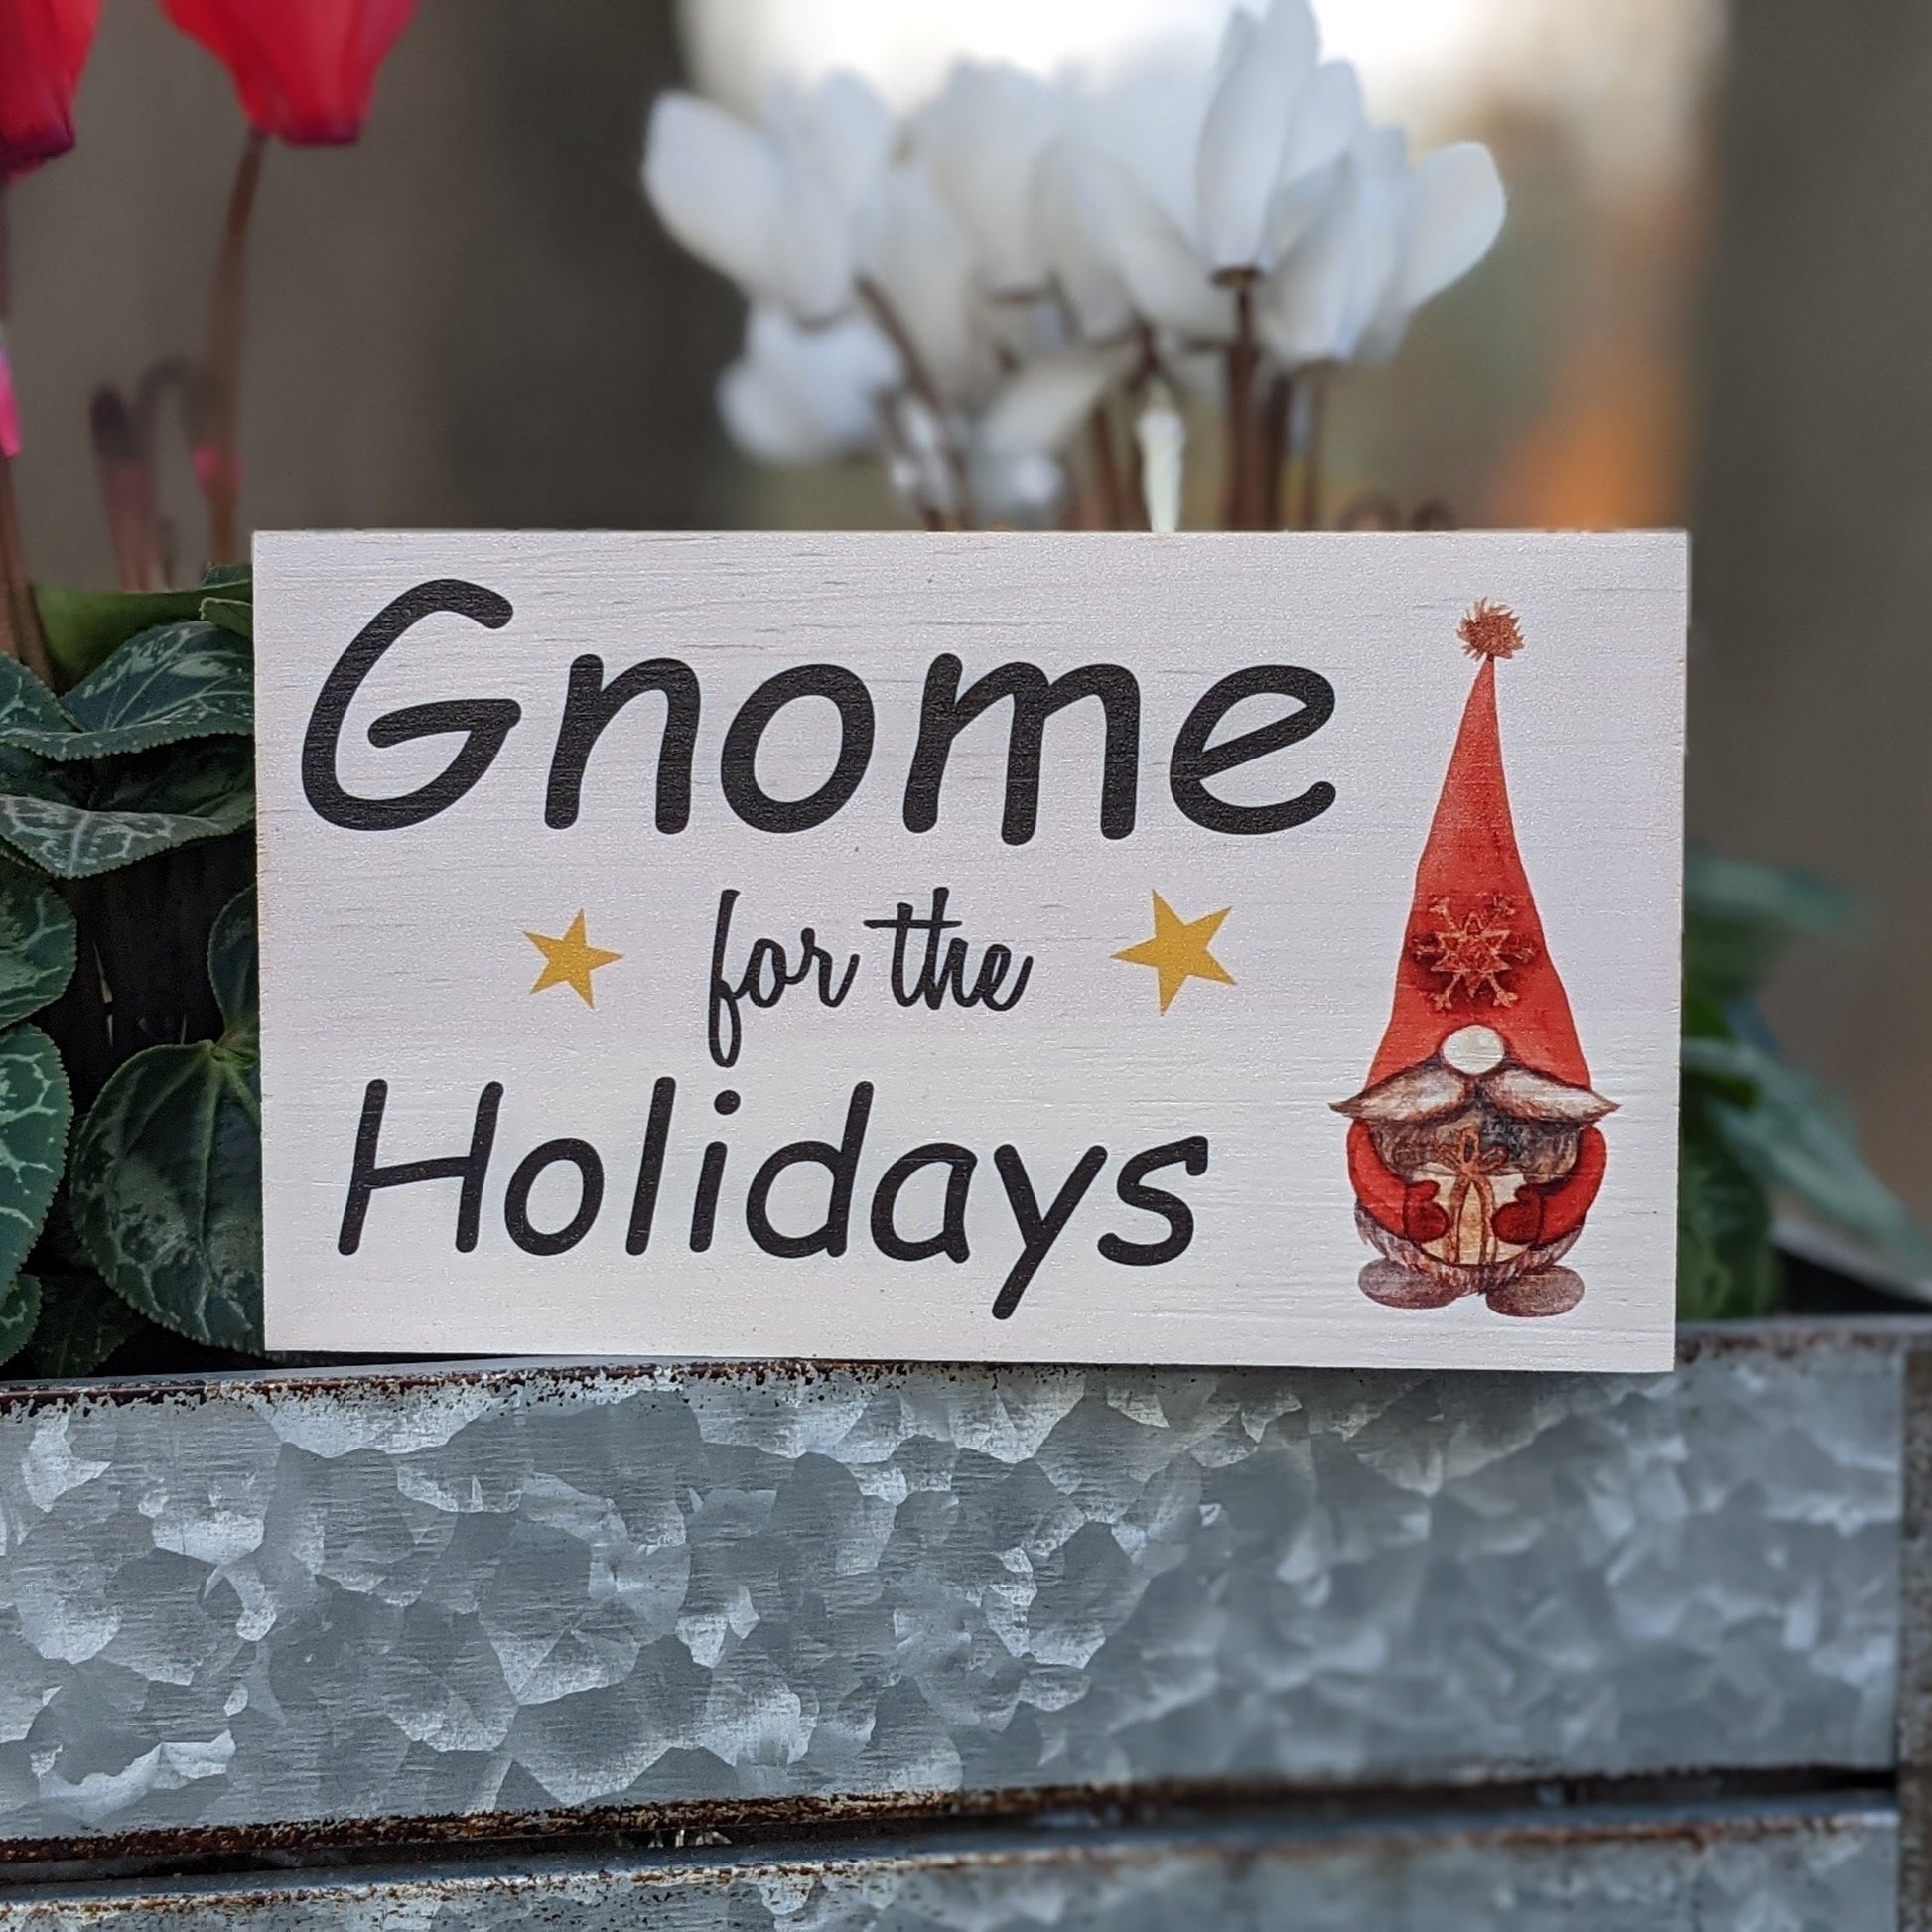 Christmas décor, Small wood sign, friend gift, funny quote, shelf sign, Gnome for the holidays